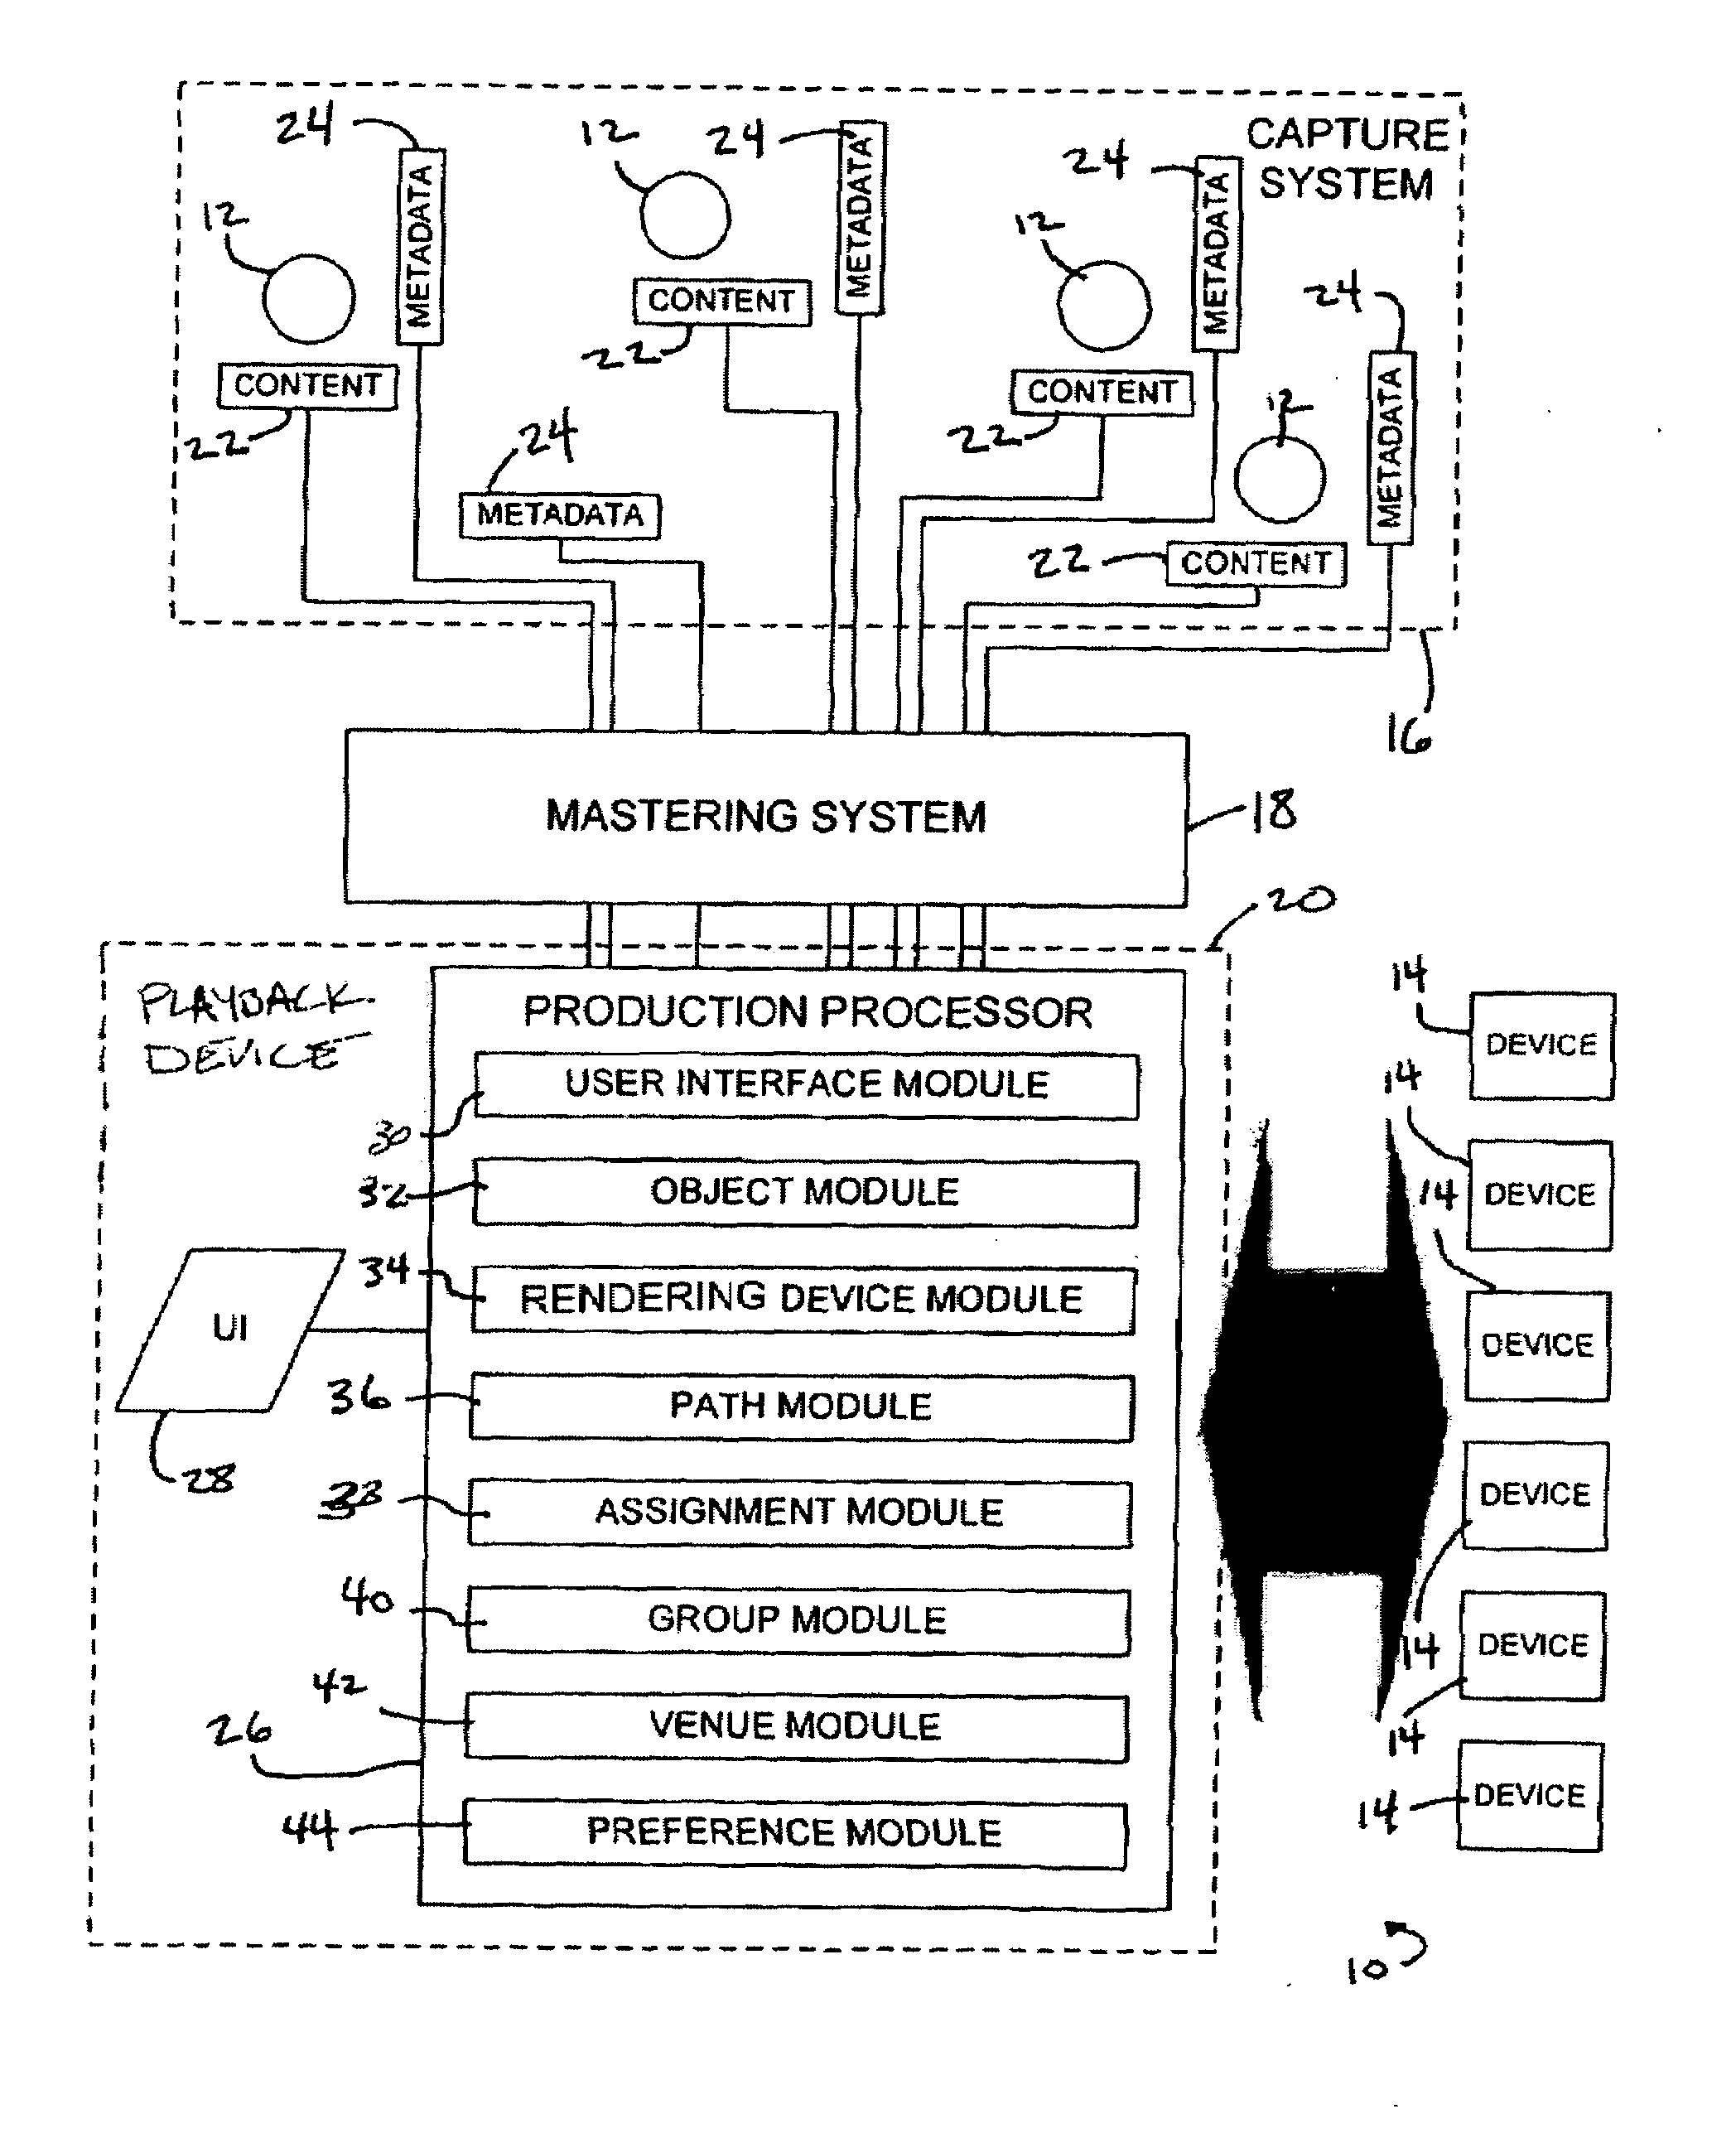 Playback Device For Generating Sound Events